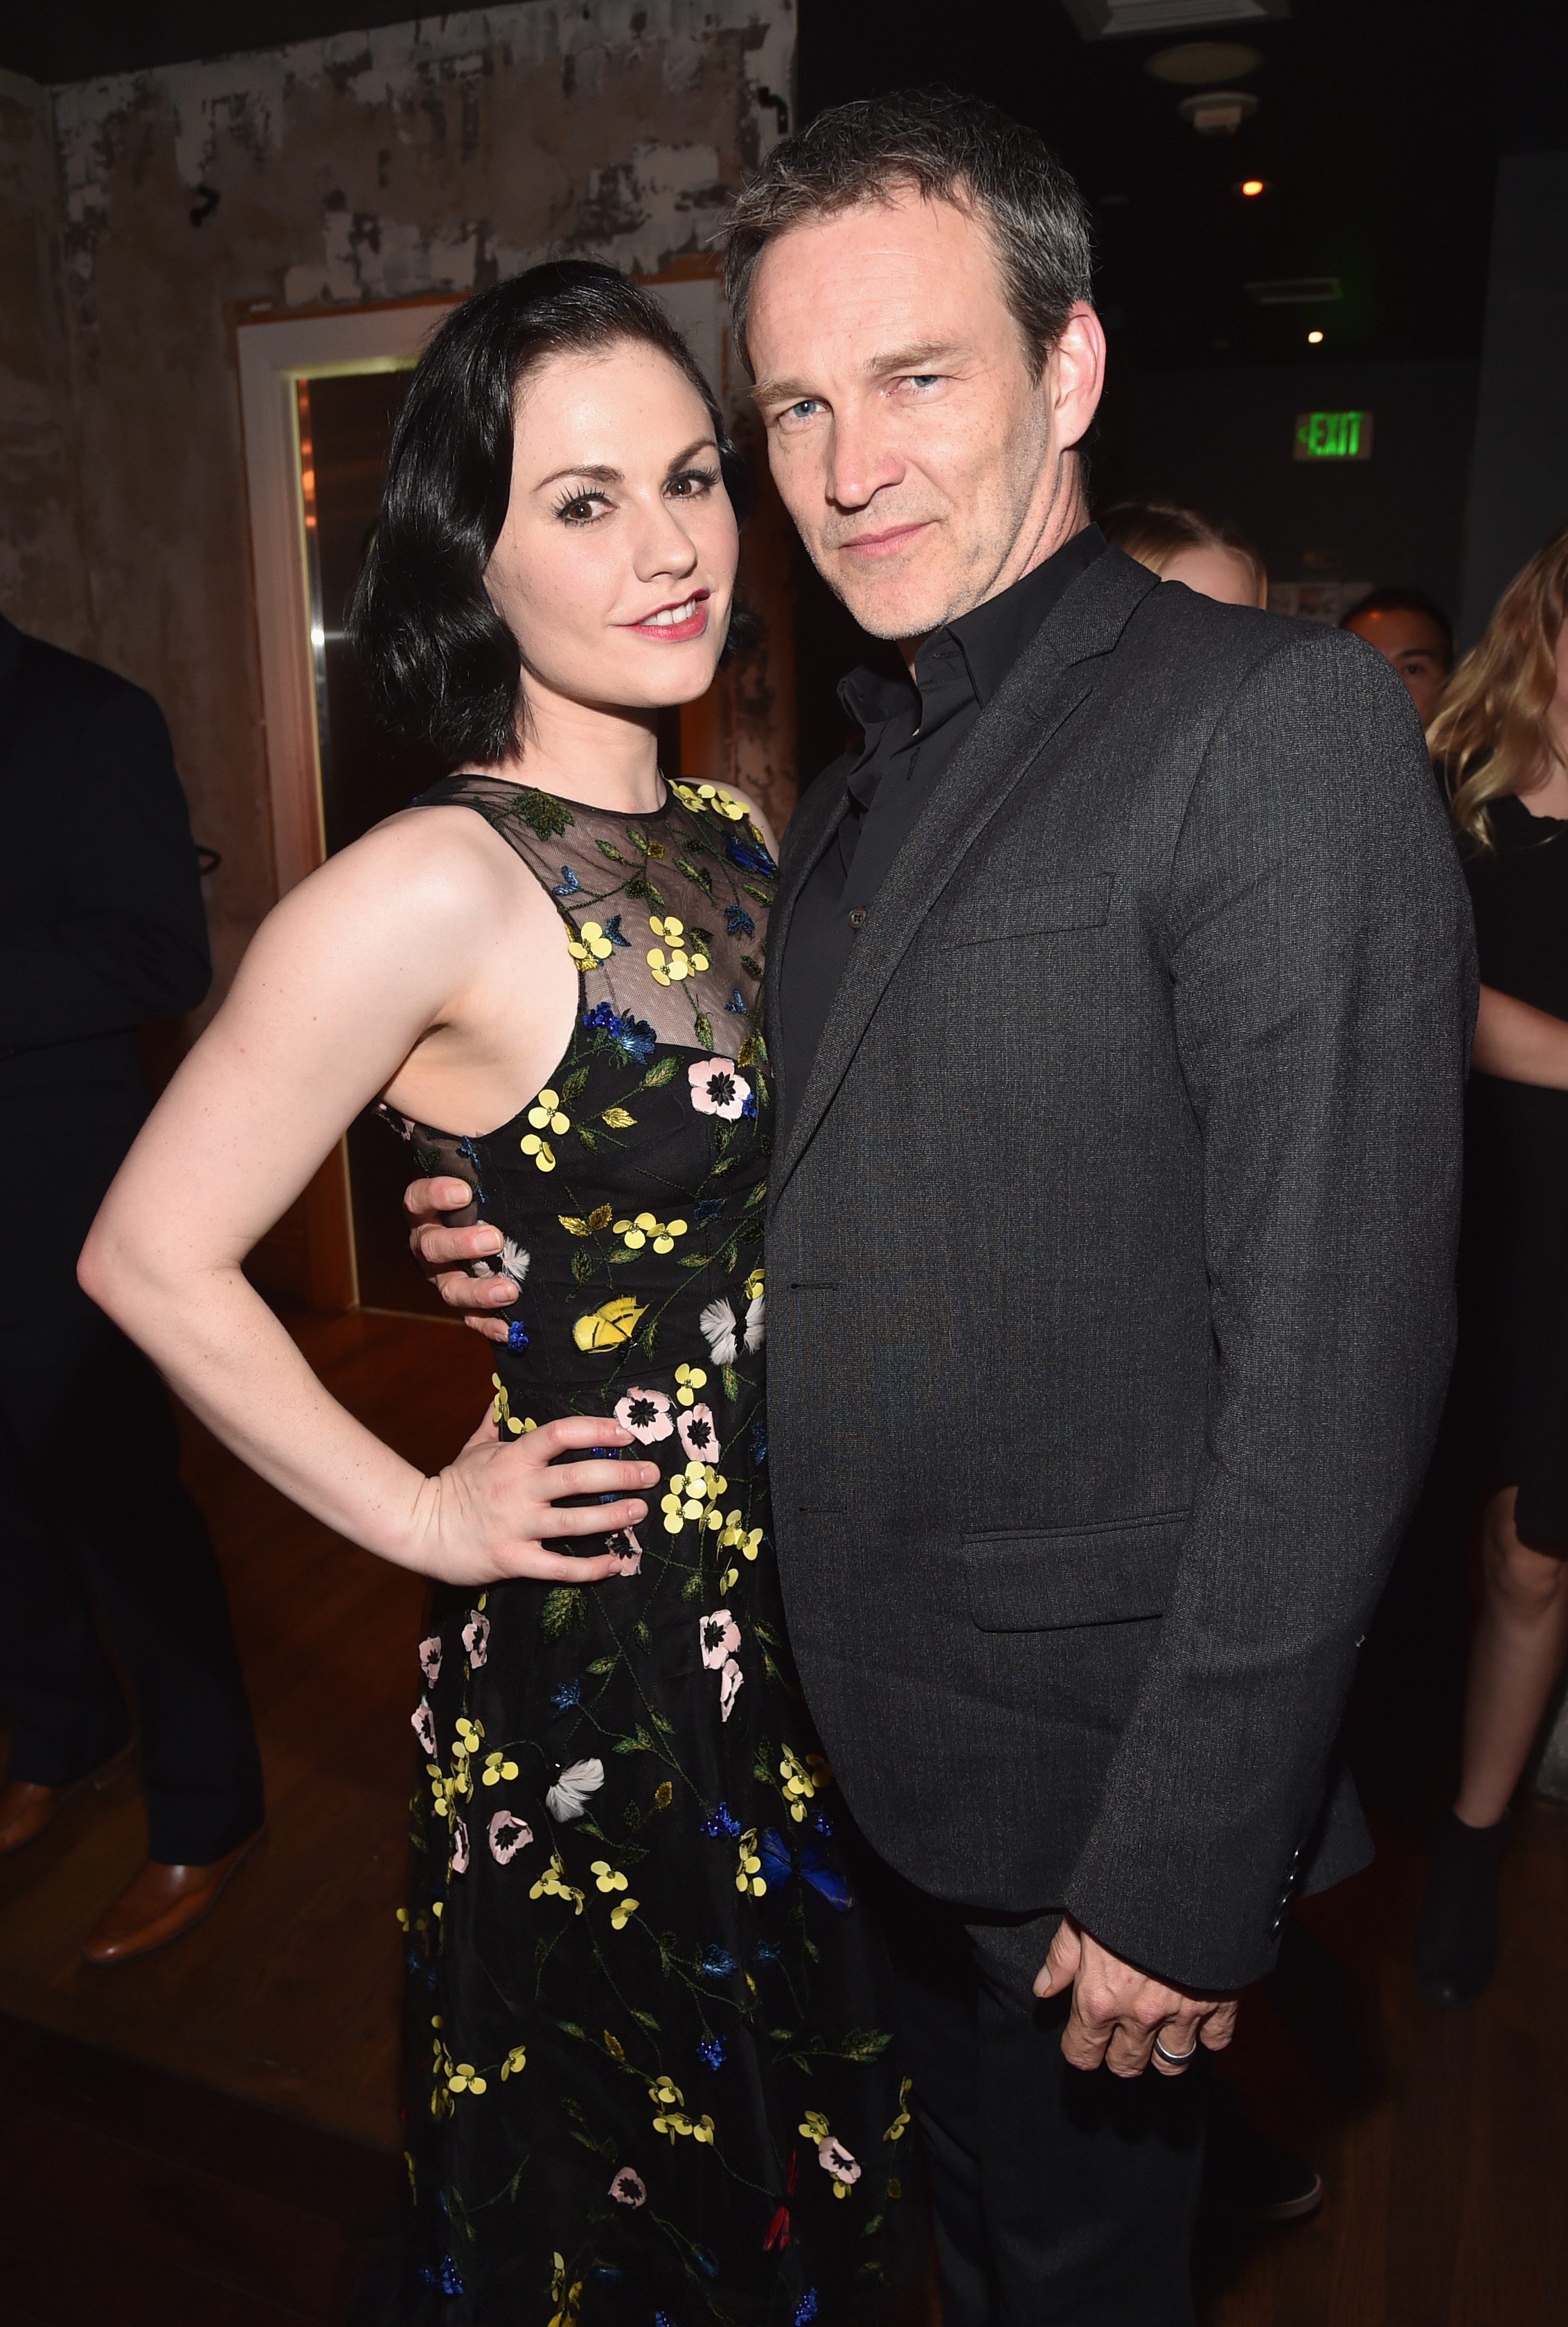 HOLLYWOOD, CA - NOVEMBER 17: Actors Anna Paquin (L) and Stephen Moyer attend the World Premiere Of Disney-Pixar's THE GOOD DINOSAUR at the El Capitan Theatre on November 17, 2015 in Hollywood, California. (Photo by Alberto E. Rodriguez/Getty Images for Disney) *** Local Caption *** Anna Paquin; Stephen Moyer